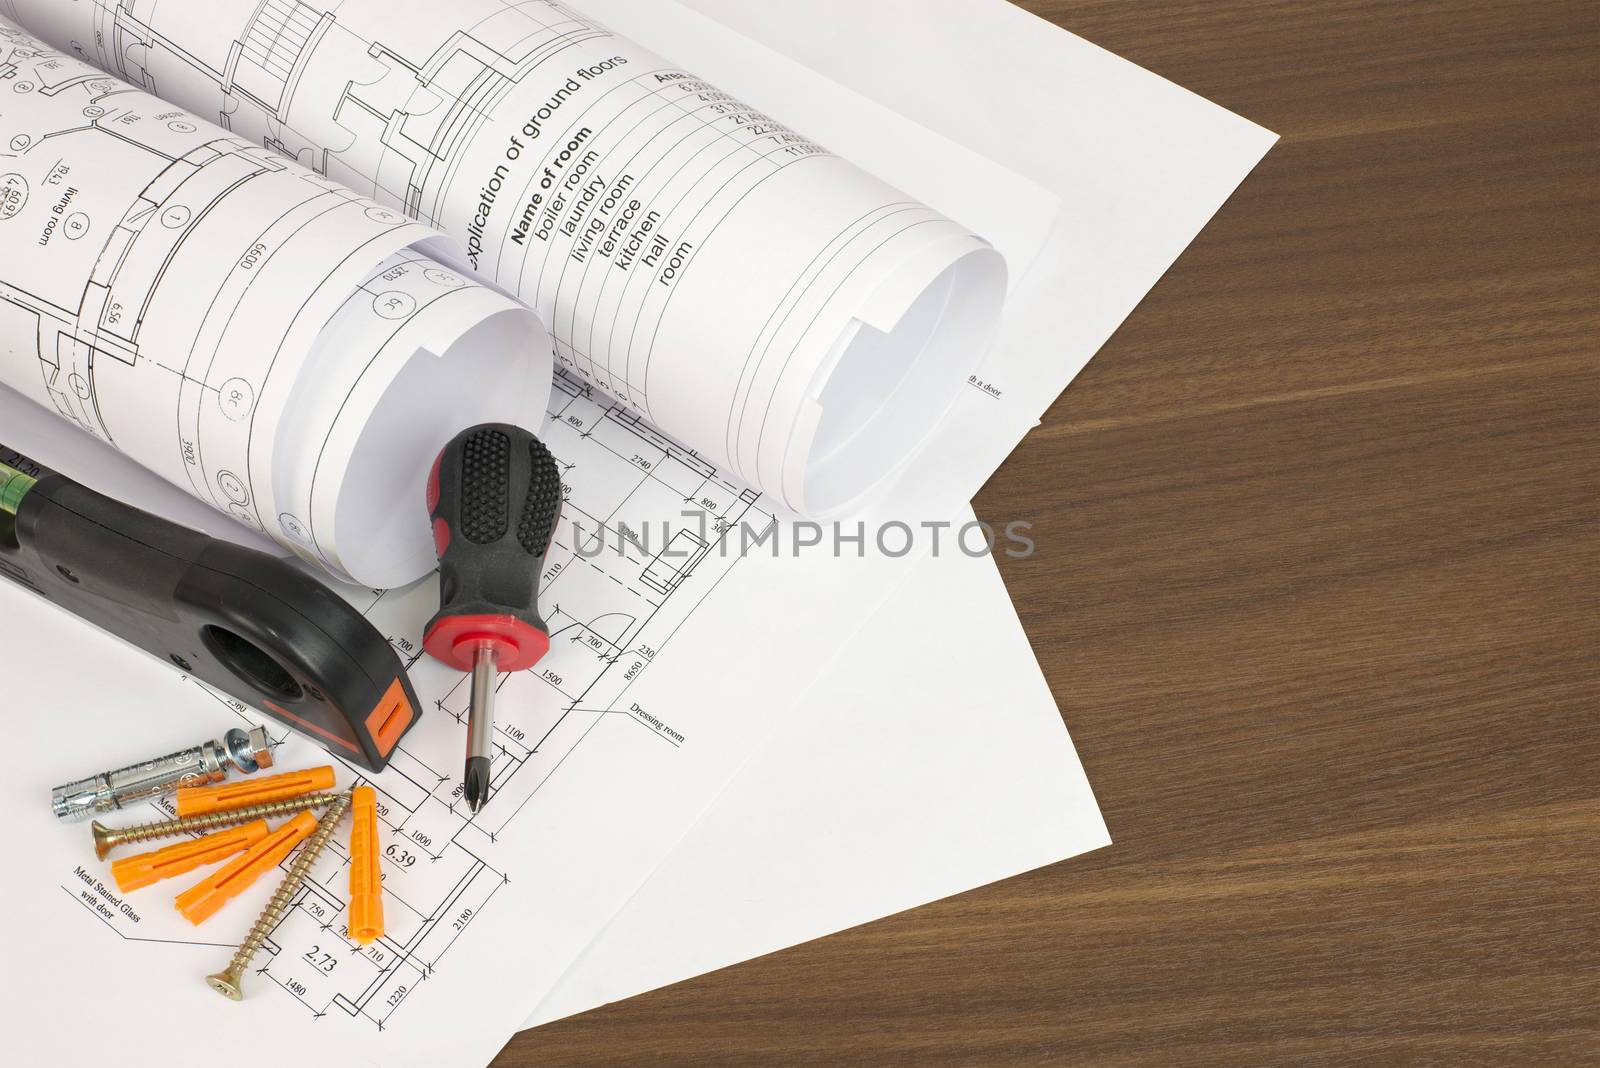 Construction drawings, screwdriver, screws and level on a wooden surface. Desk builder